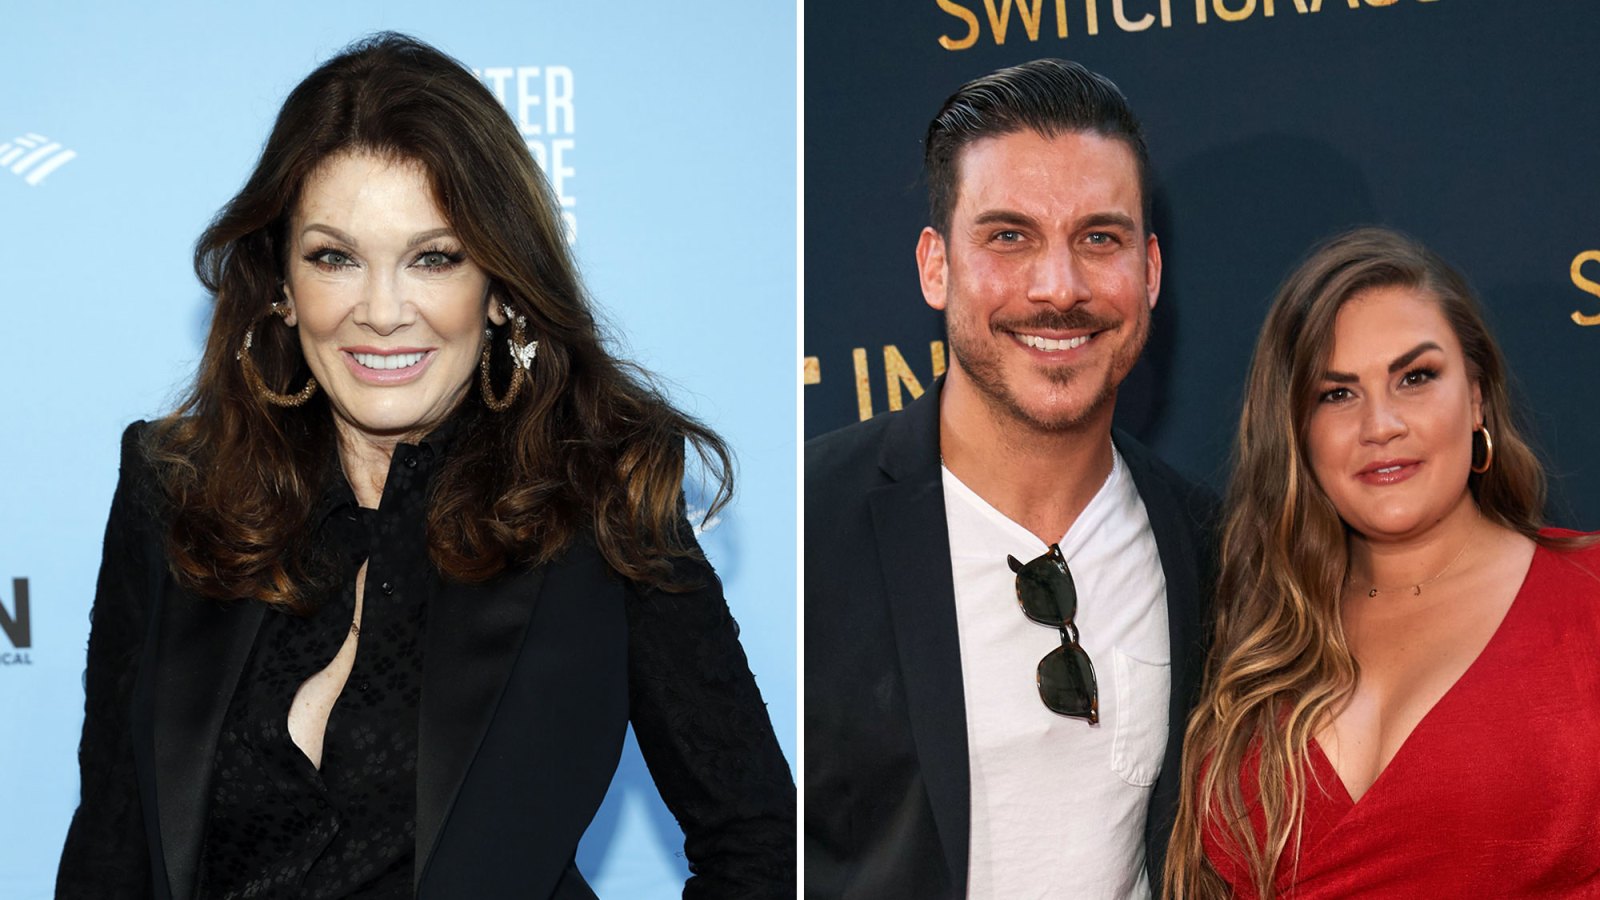 Lisa Vanderpump Addresses Brittany Cartwright's Claim That She Didn't Reach Out to Her and Jax Taylor